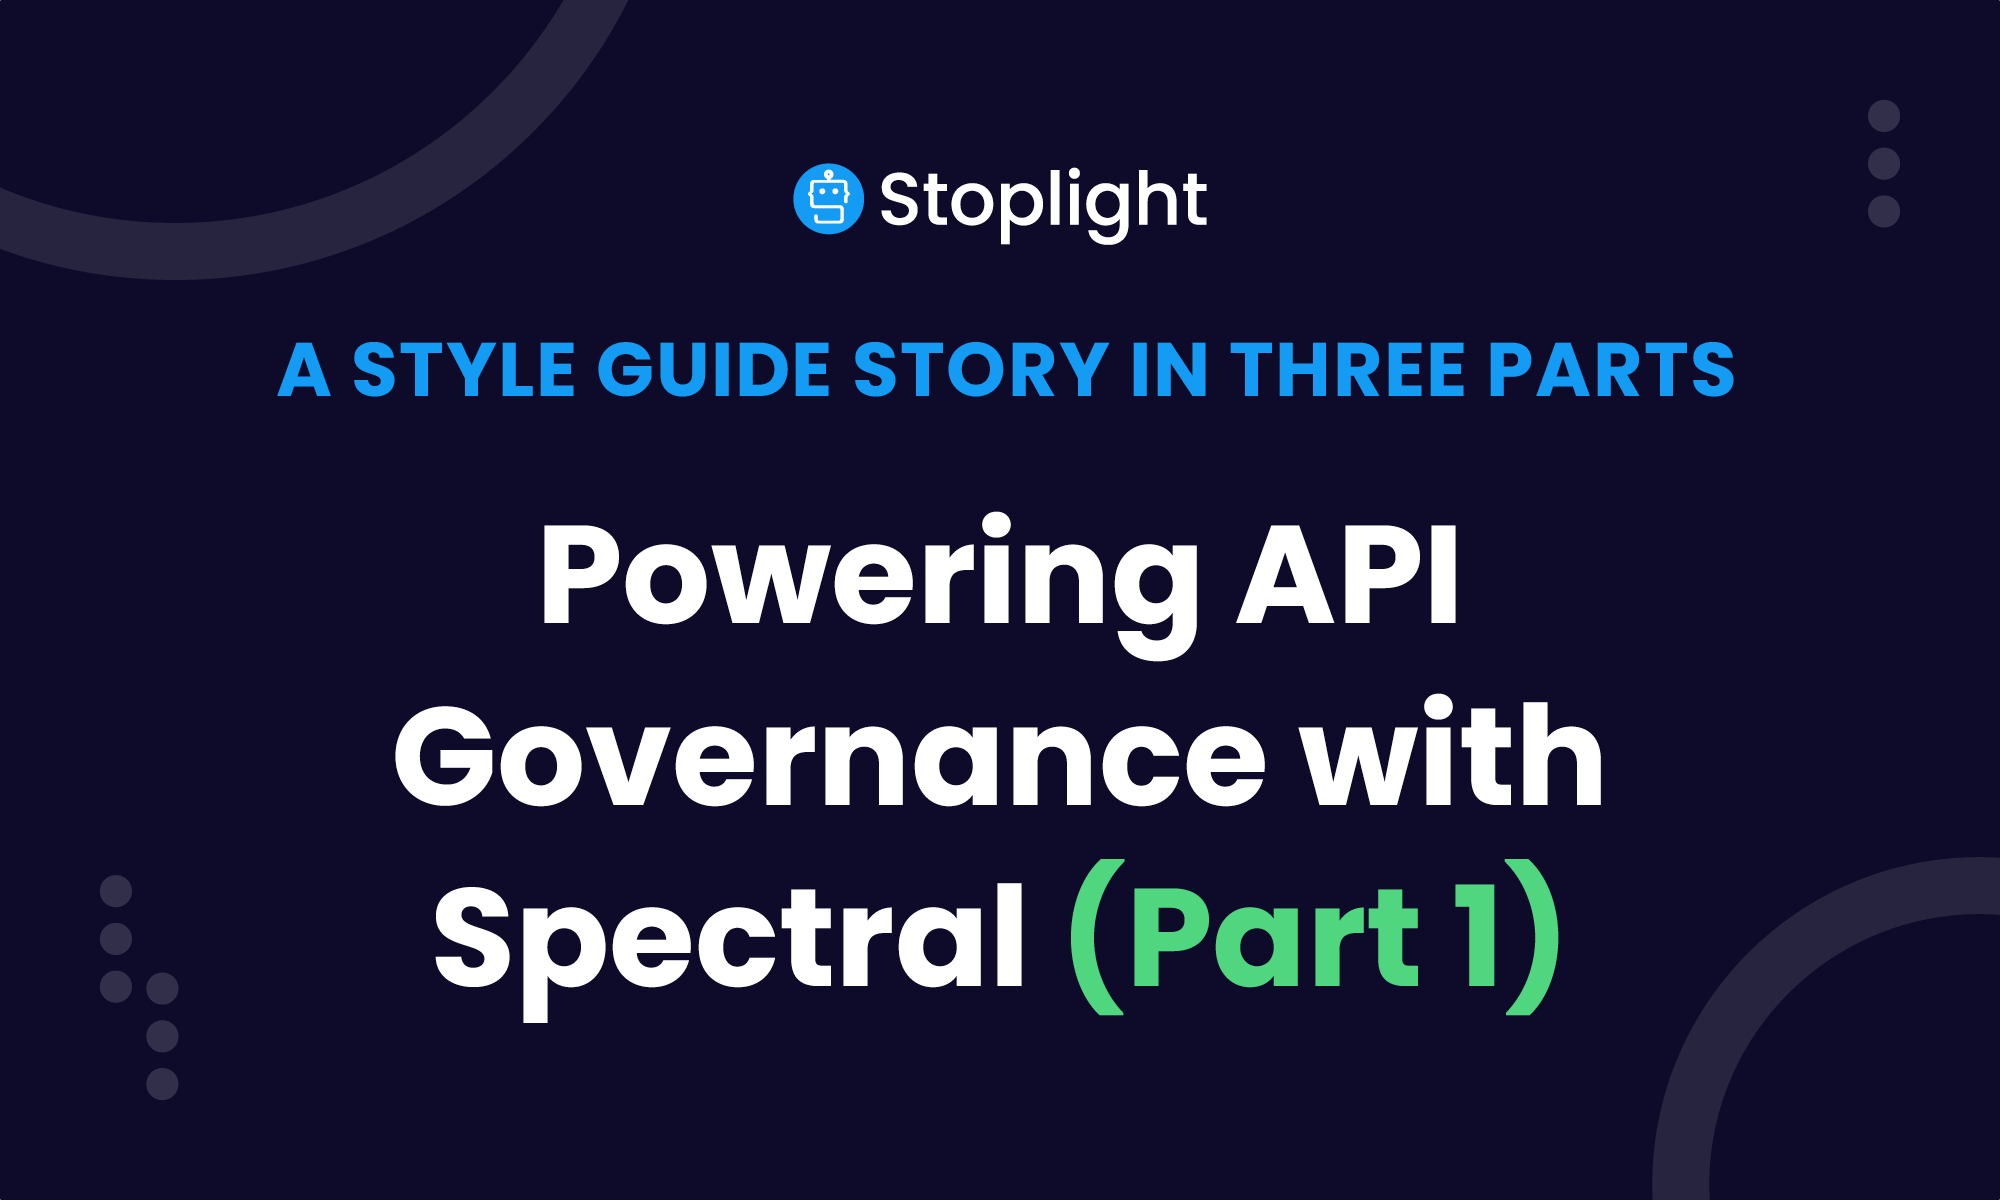 Powering API Governance with Spectral: Part One